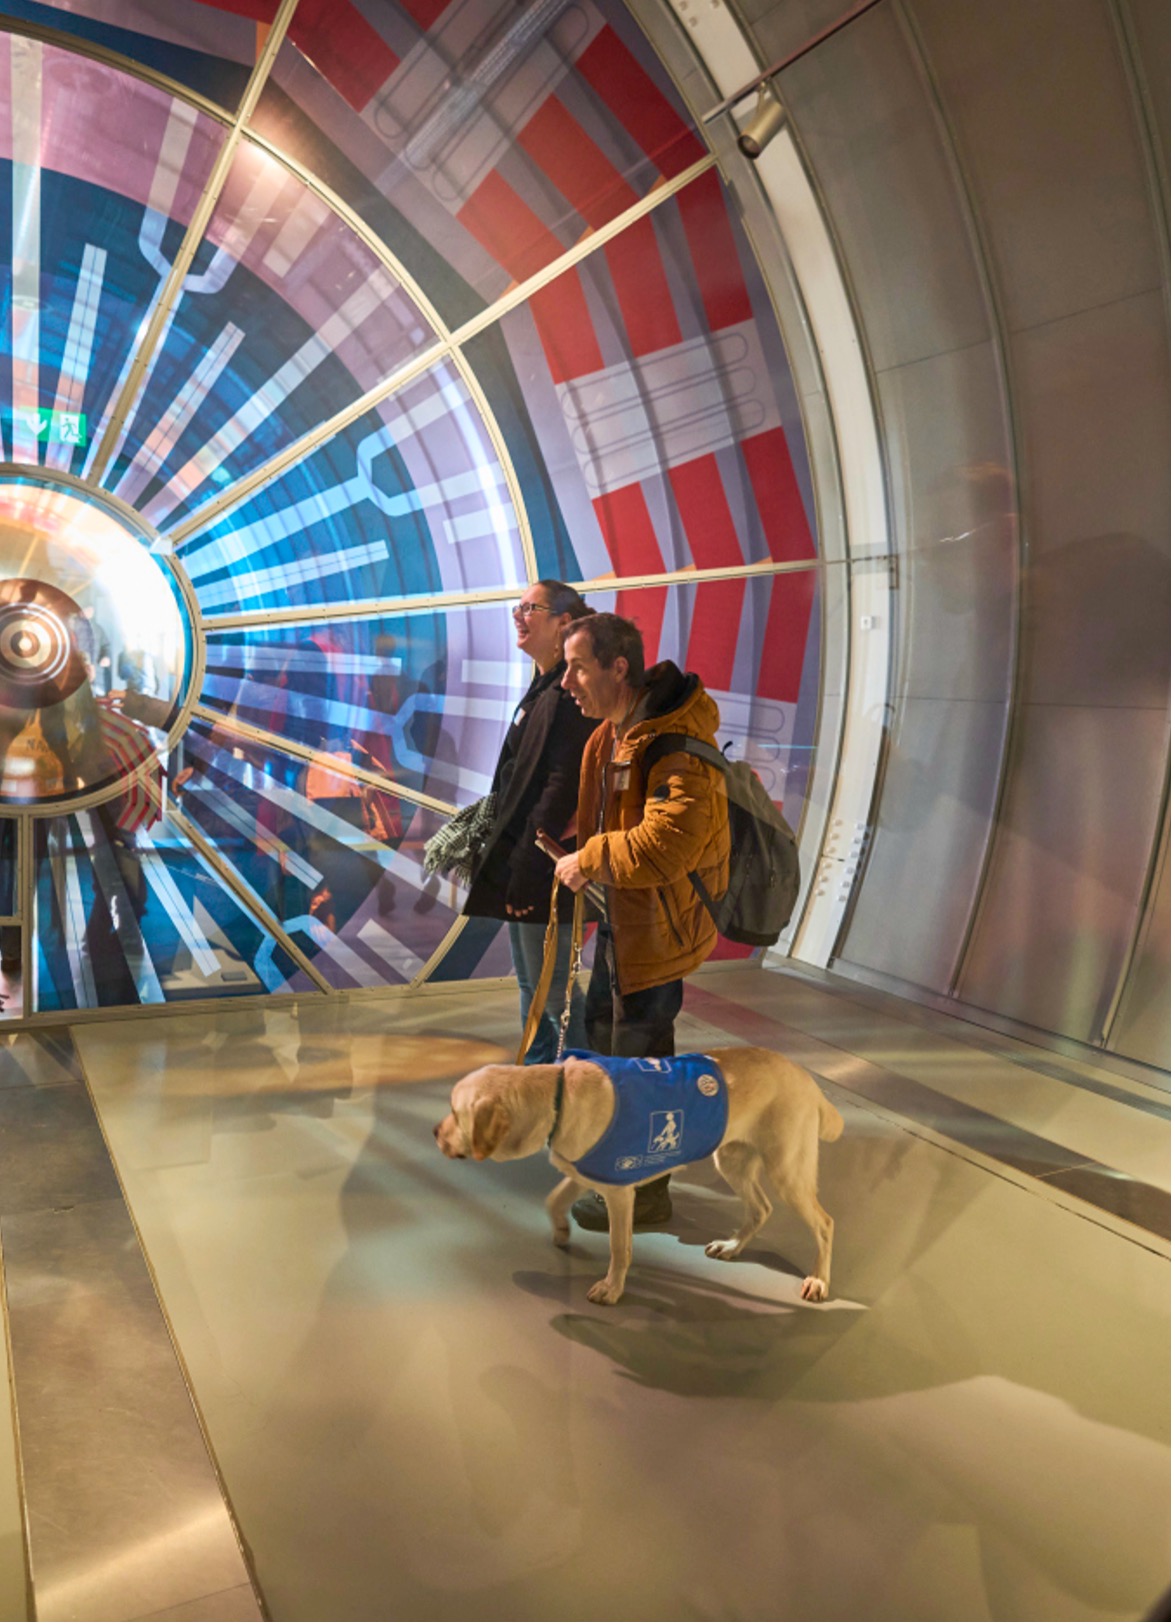 A visitor from ABA touring the “Discover CERN: Collide” exhibition with his guide and guide dog. In the background is a transluscent circular window with red and blue sections to show a slice of a CERN detector